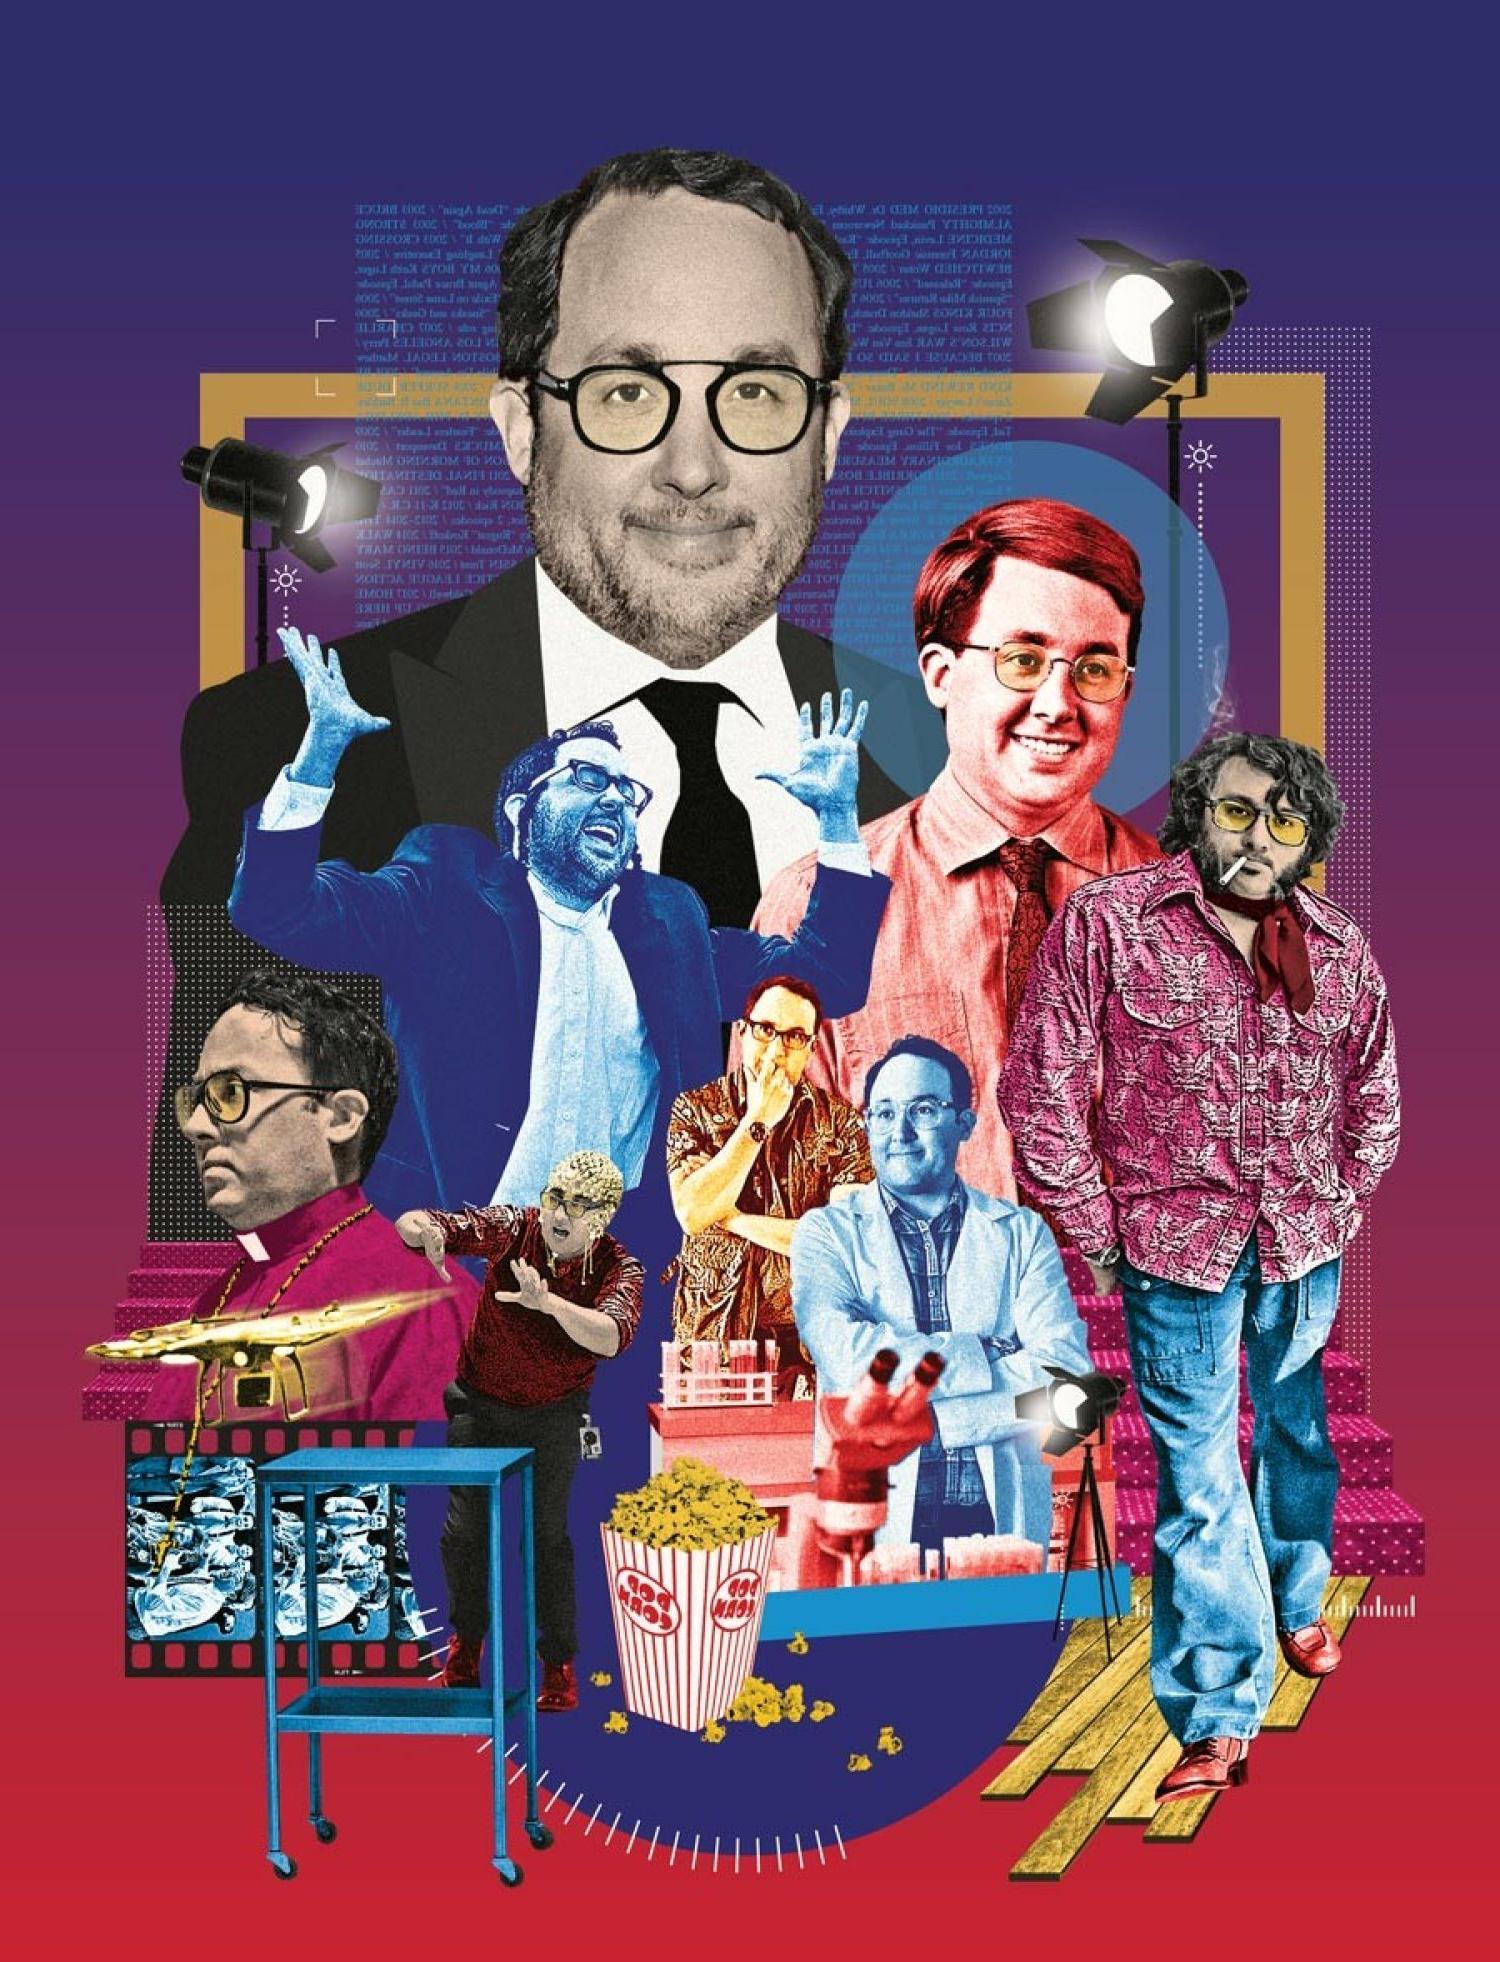 Illustration of PJ Byrne and a selection of his film roles